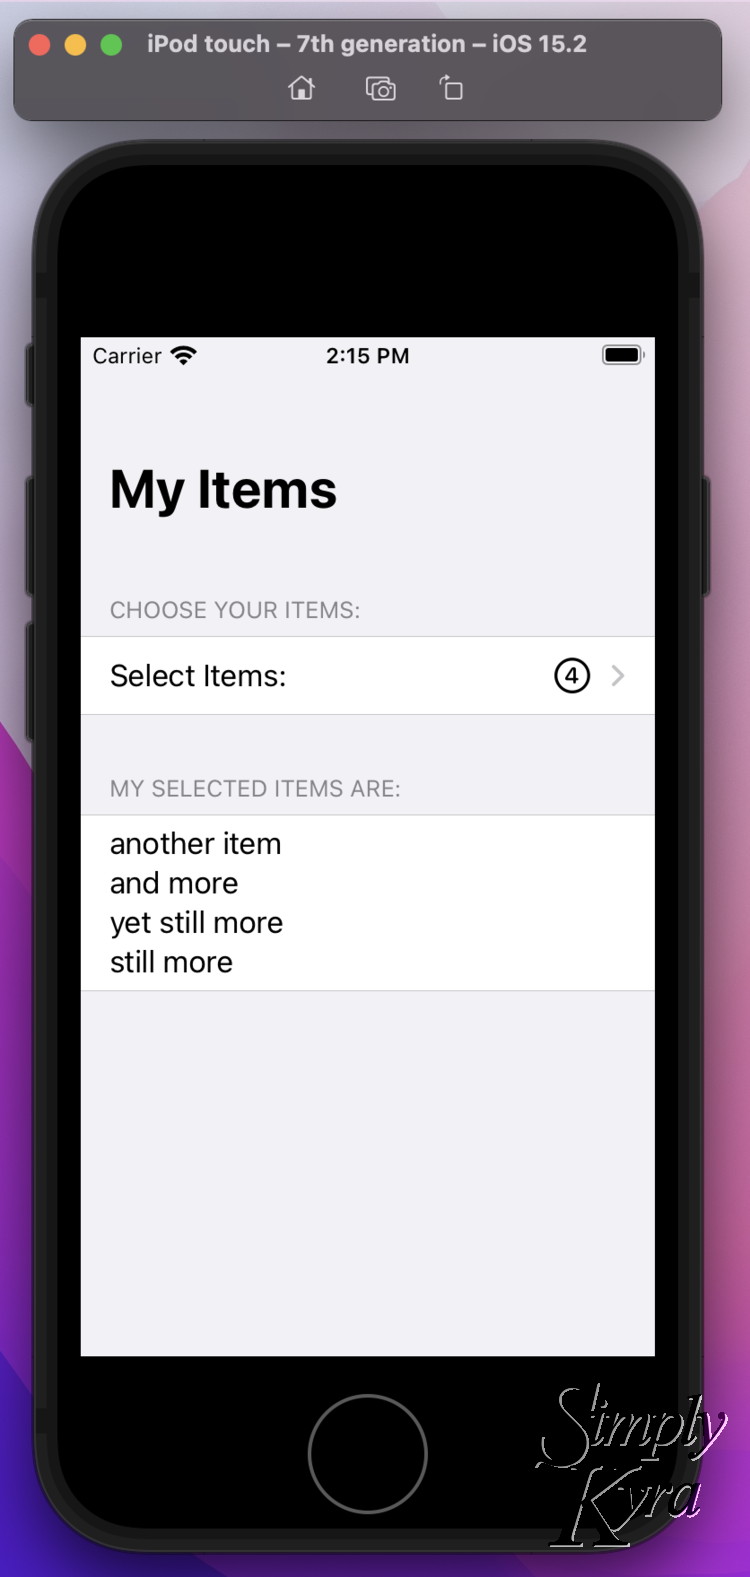 Image shows a NavigationView within an iPod touch simulator showing the title "My Items", the "Choose Your Items" section with the number four showing, and the "My Selected Items Are" section with the four items listed one after each other. 